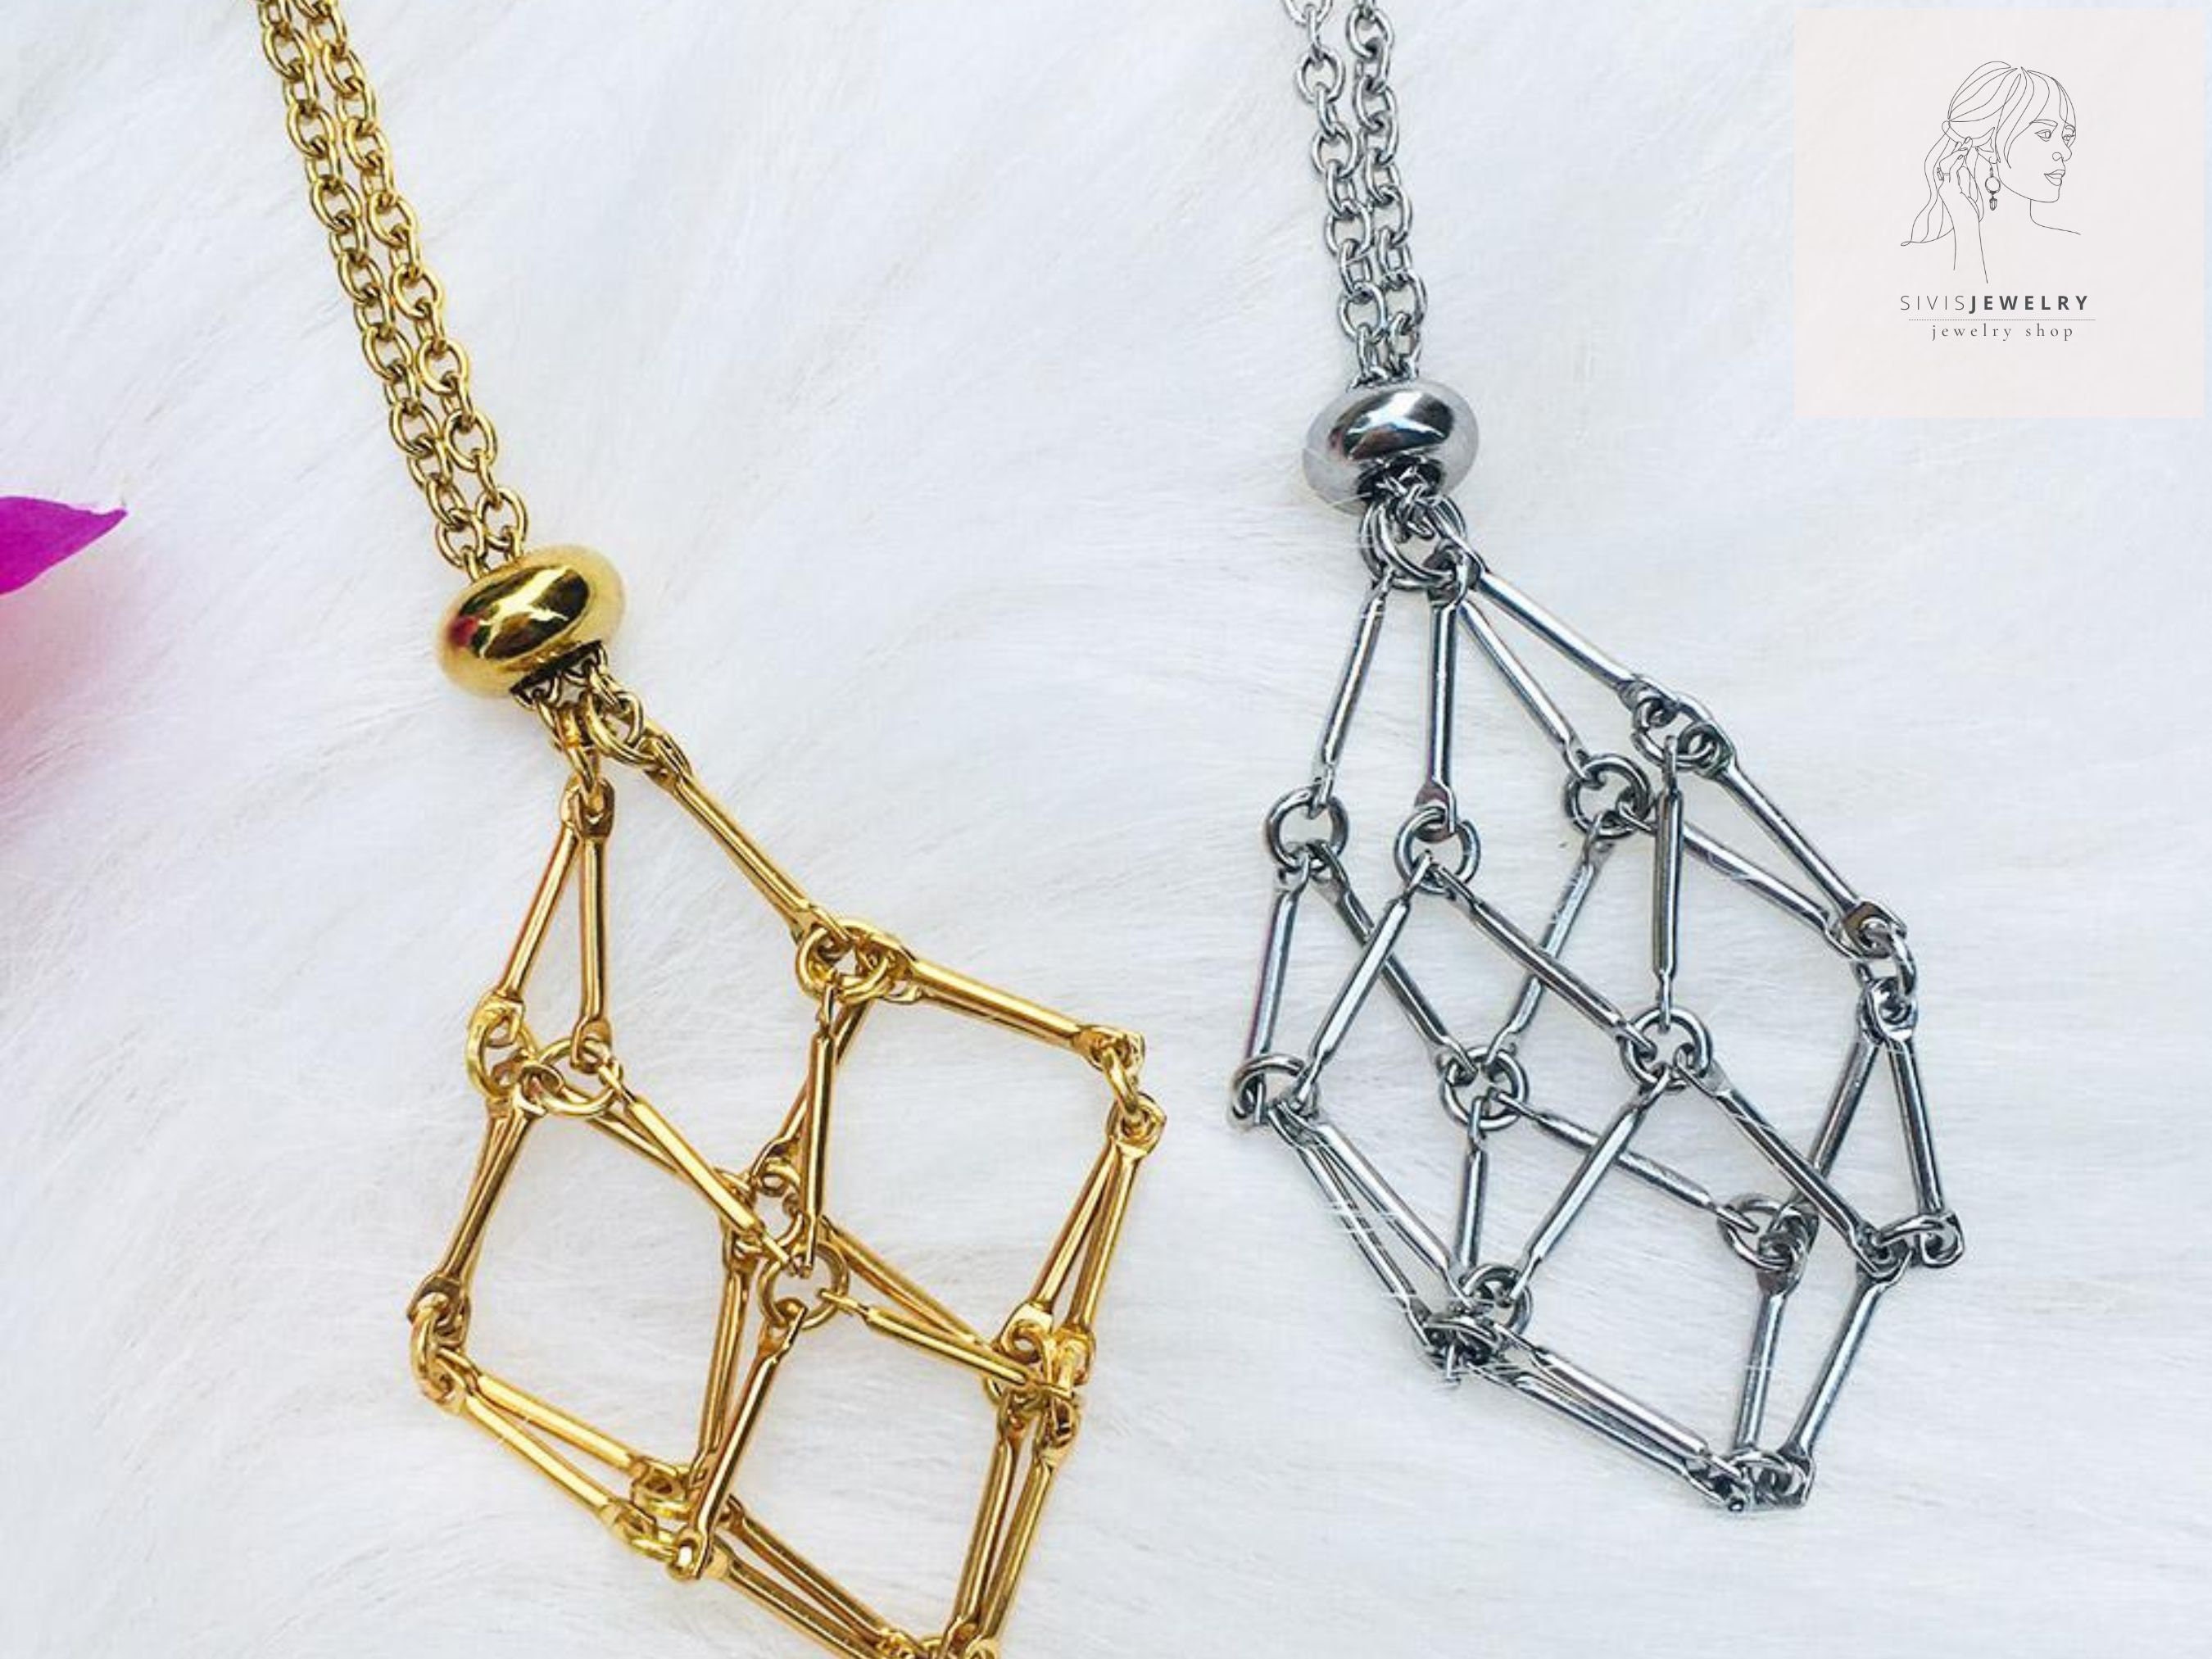 Stainless Steel Crystal Holder Cage Necklace Silver Color Stone